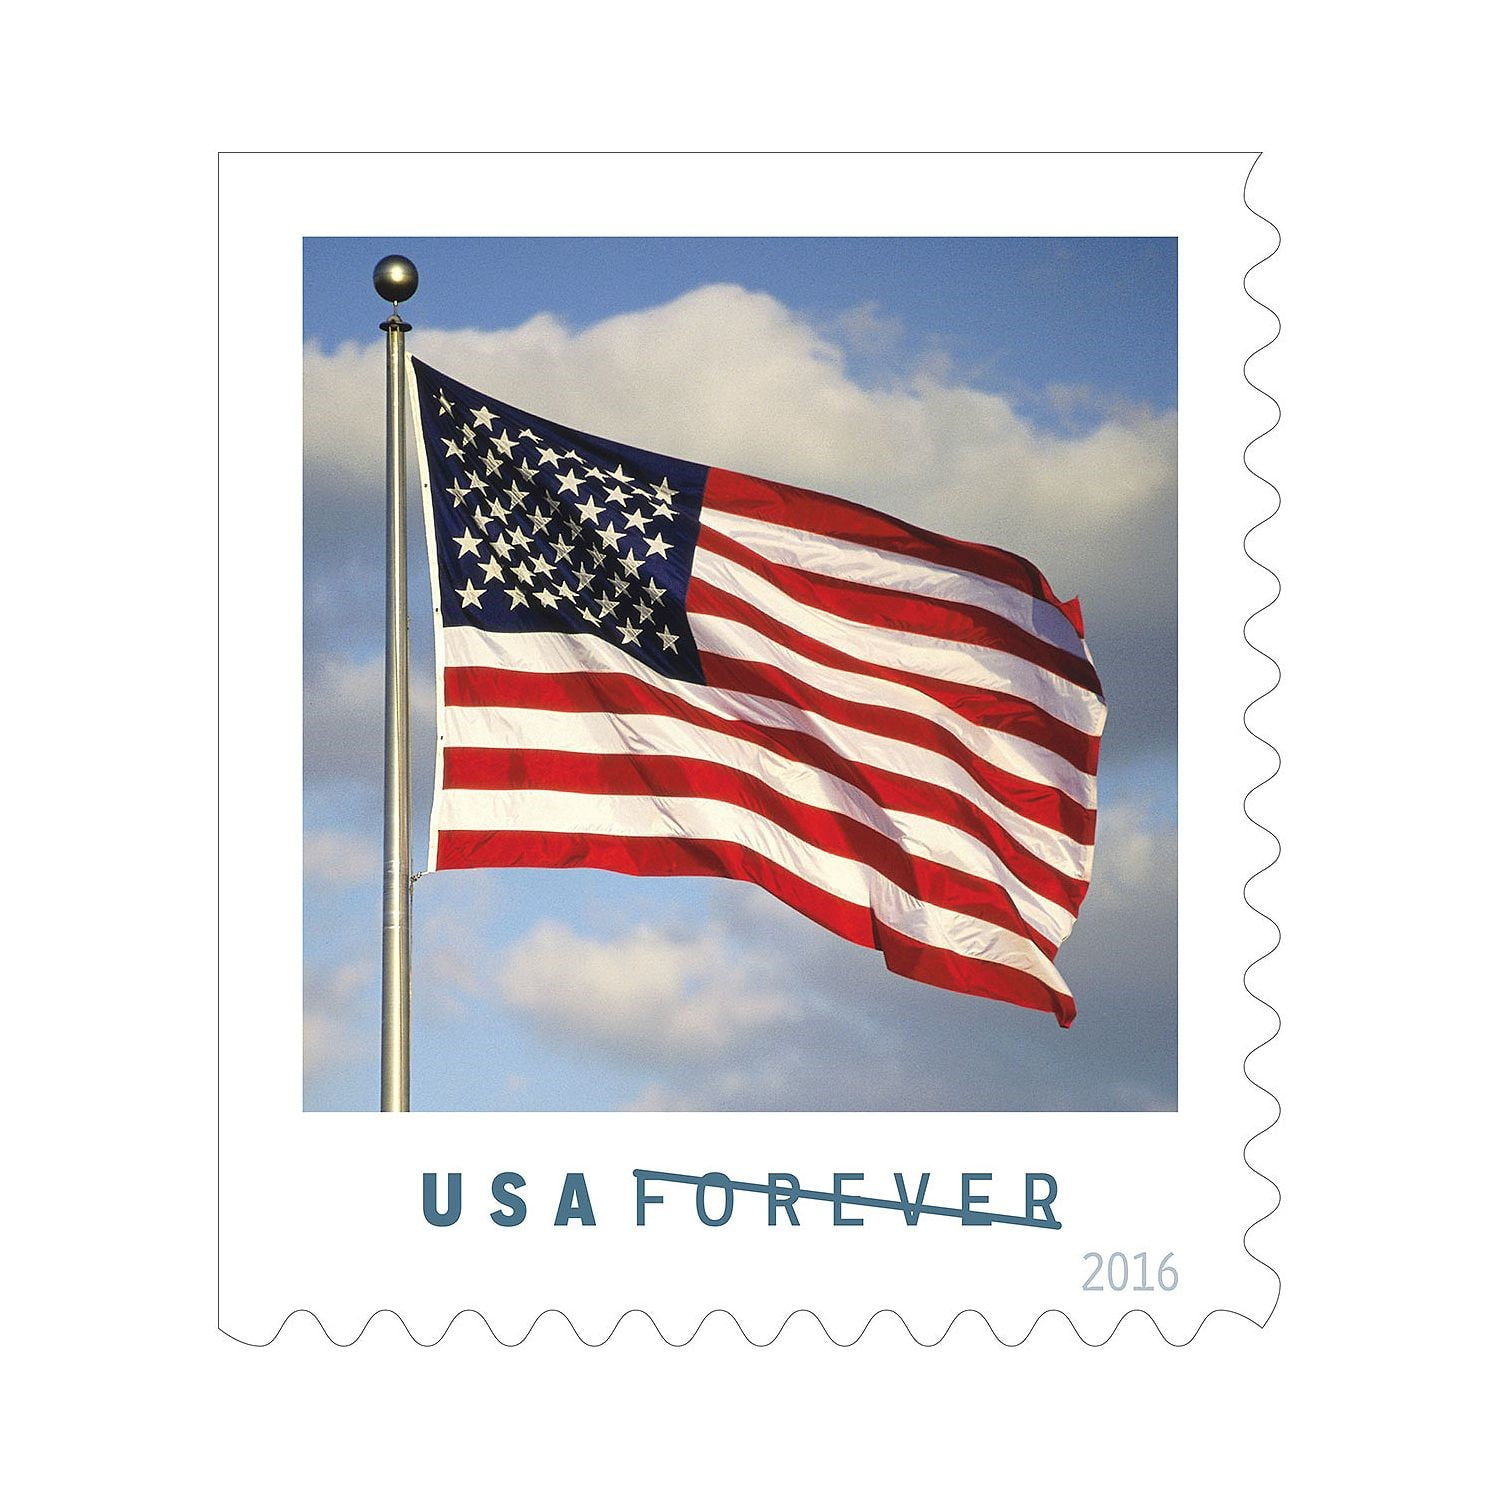 2 x 100 Ct Roll Forever Stamps - 2023 USPS First-Class Mail Postage Stamps